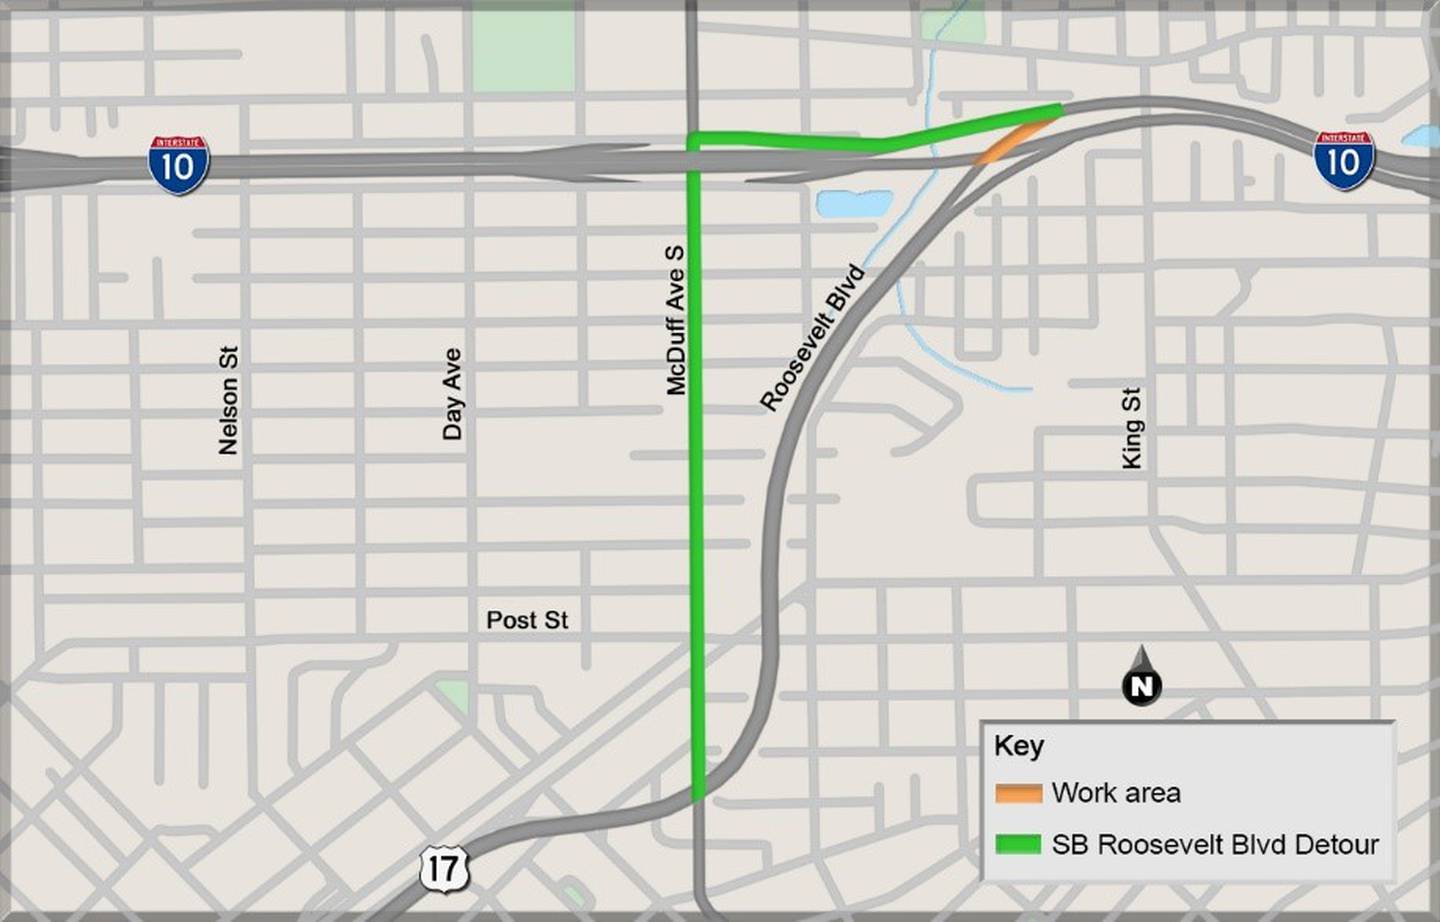 I-10  West exit to Roosevelt Boulevard (U.S. 17) will be detoured Saturday, Dec. 10 and Sunday, Dec. 11 from 5 a.m. to 6 p.m.